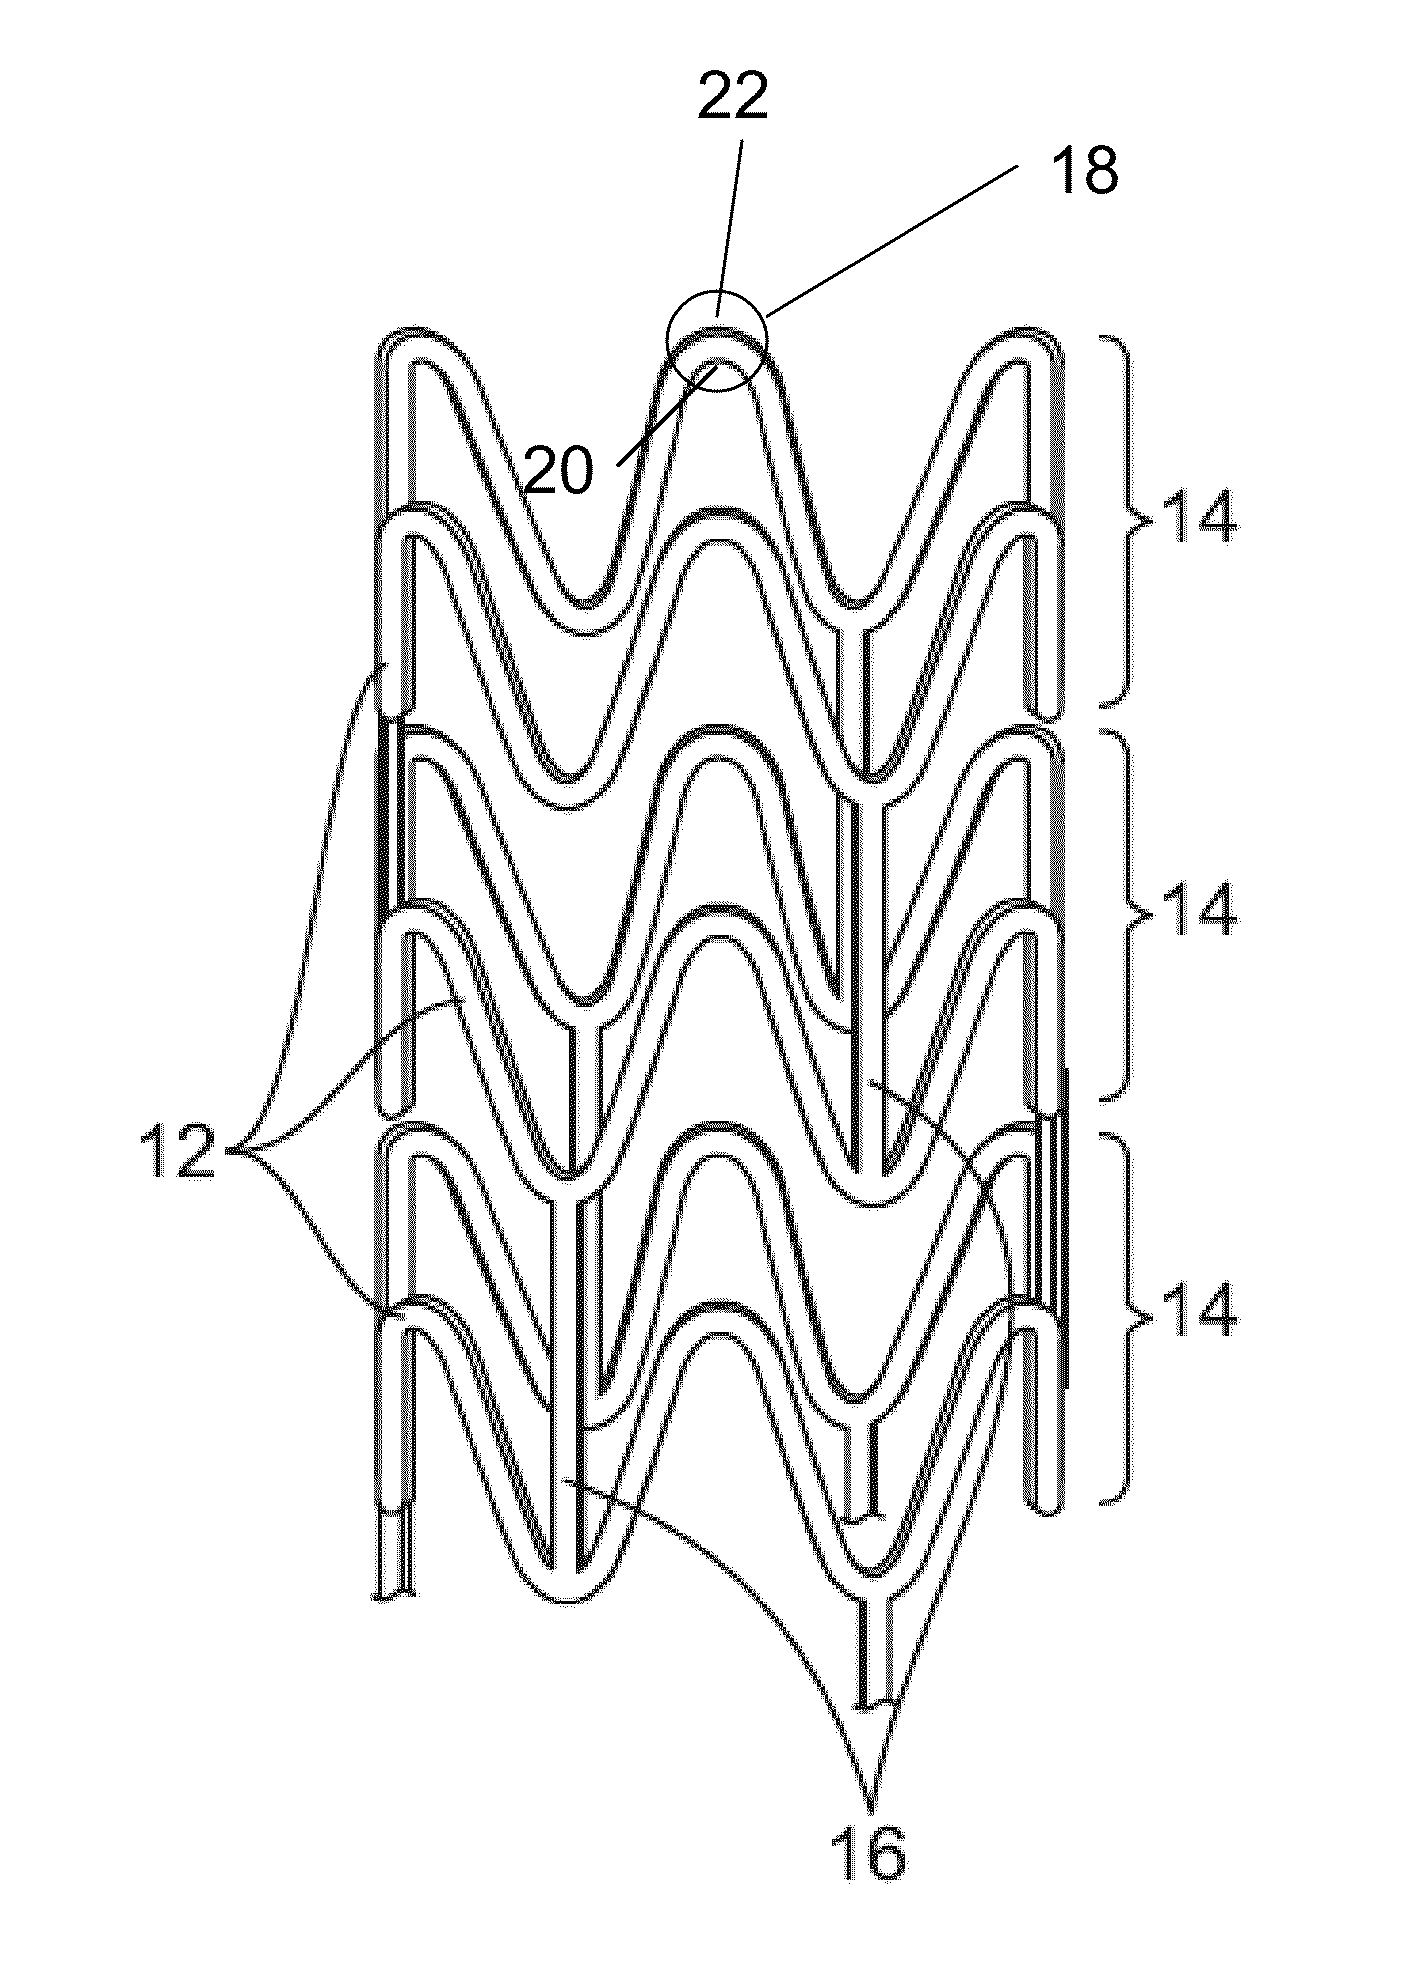 Laser System And Processing Conditions For Manufacturing Bioabsorbable Stents